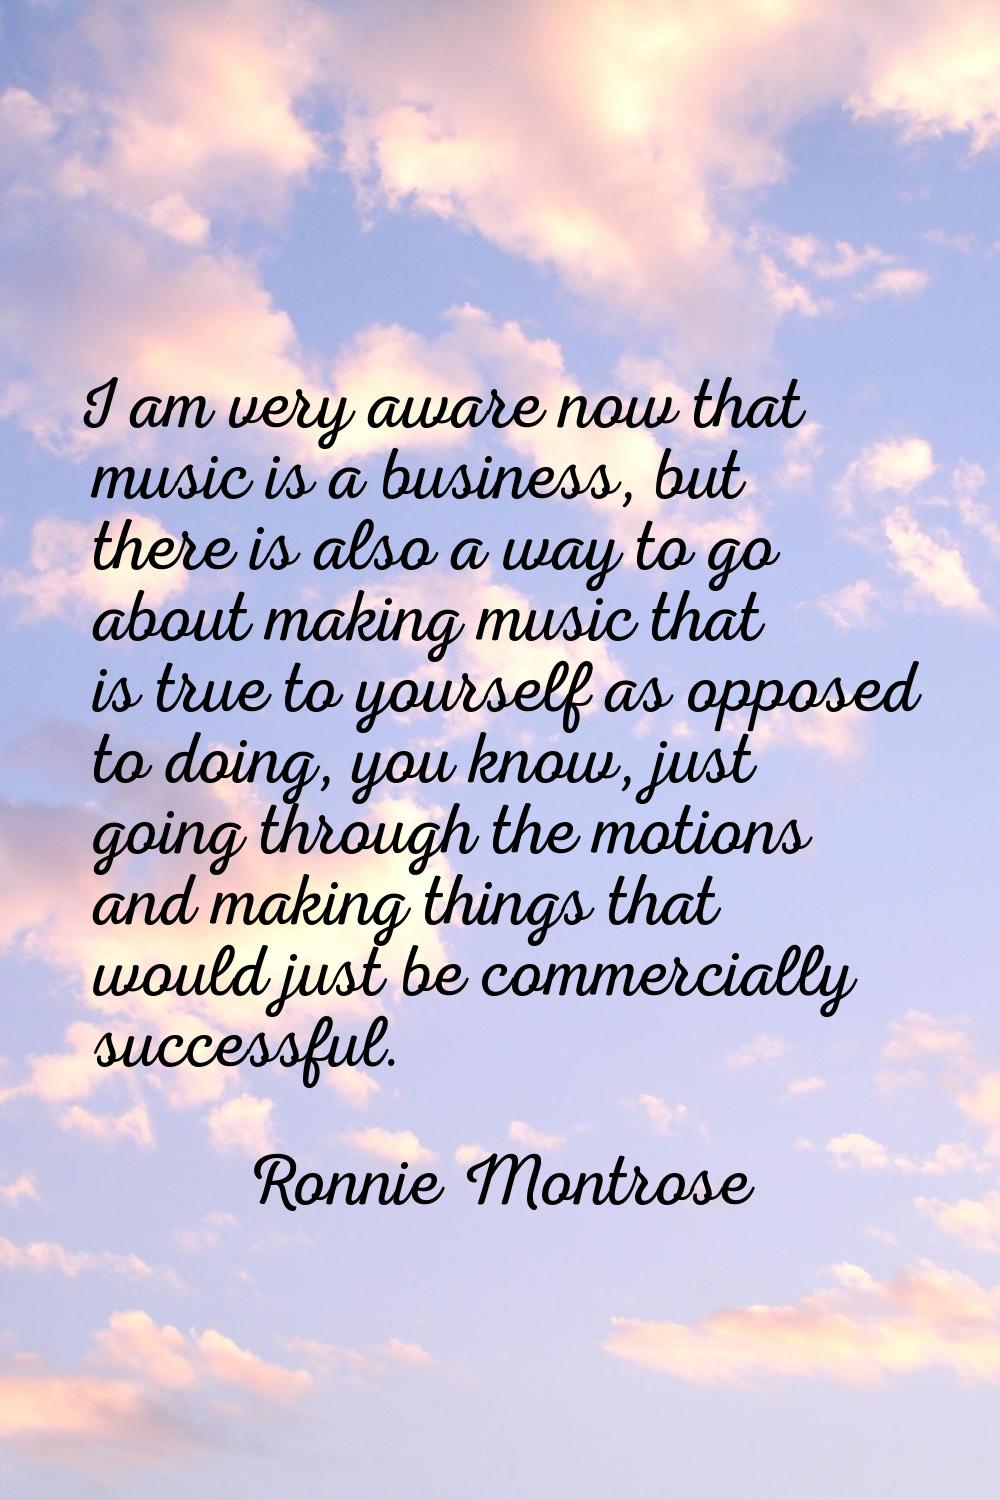 I am very aware now that music is a business, but there is also a way to go about making music that